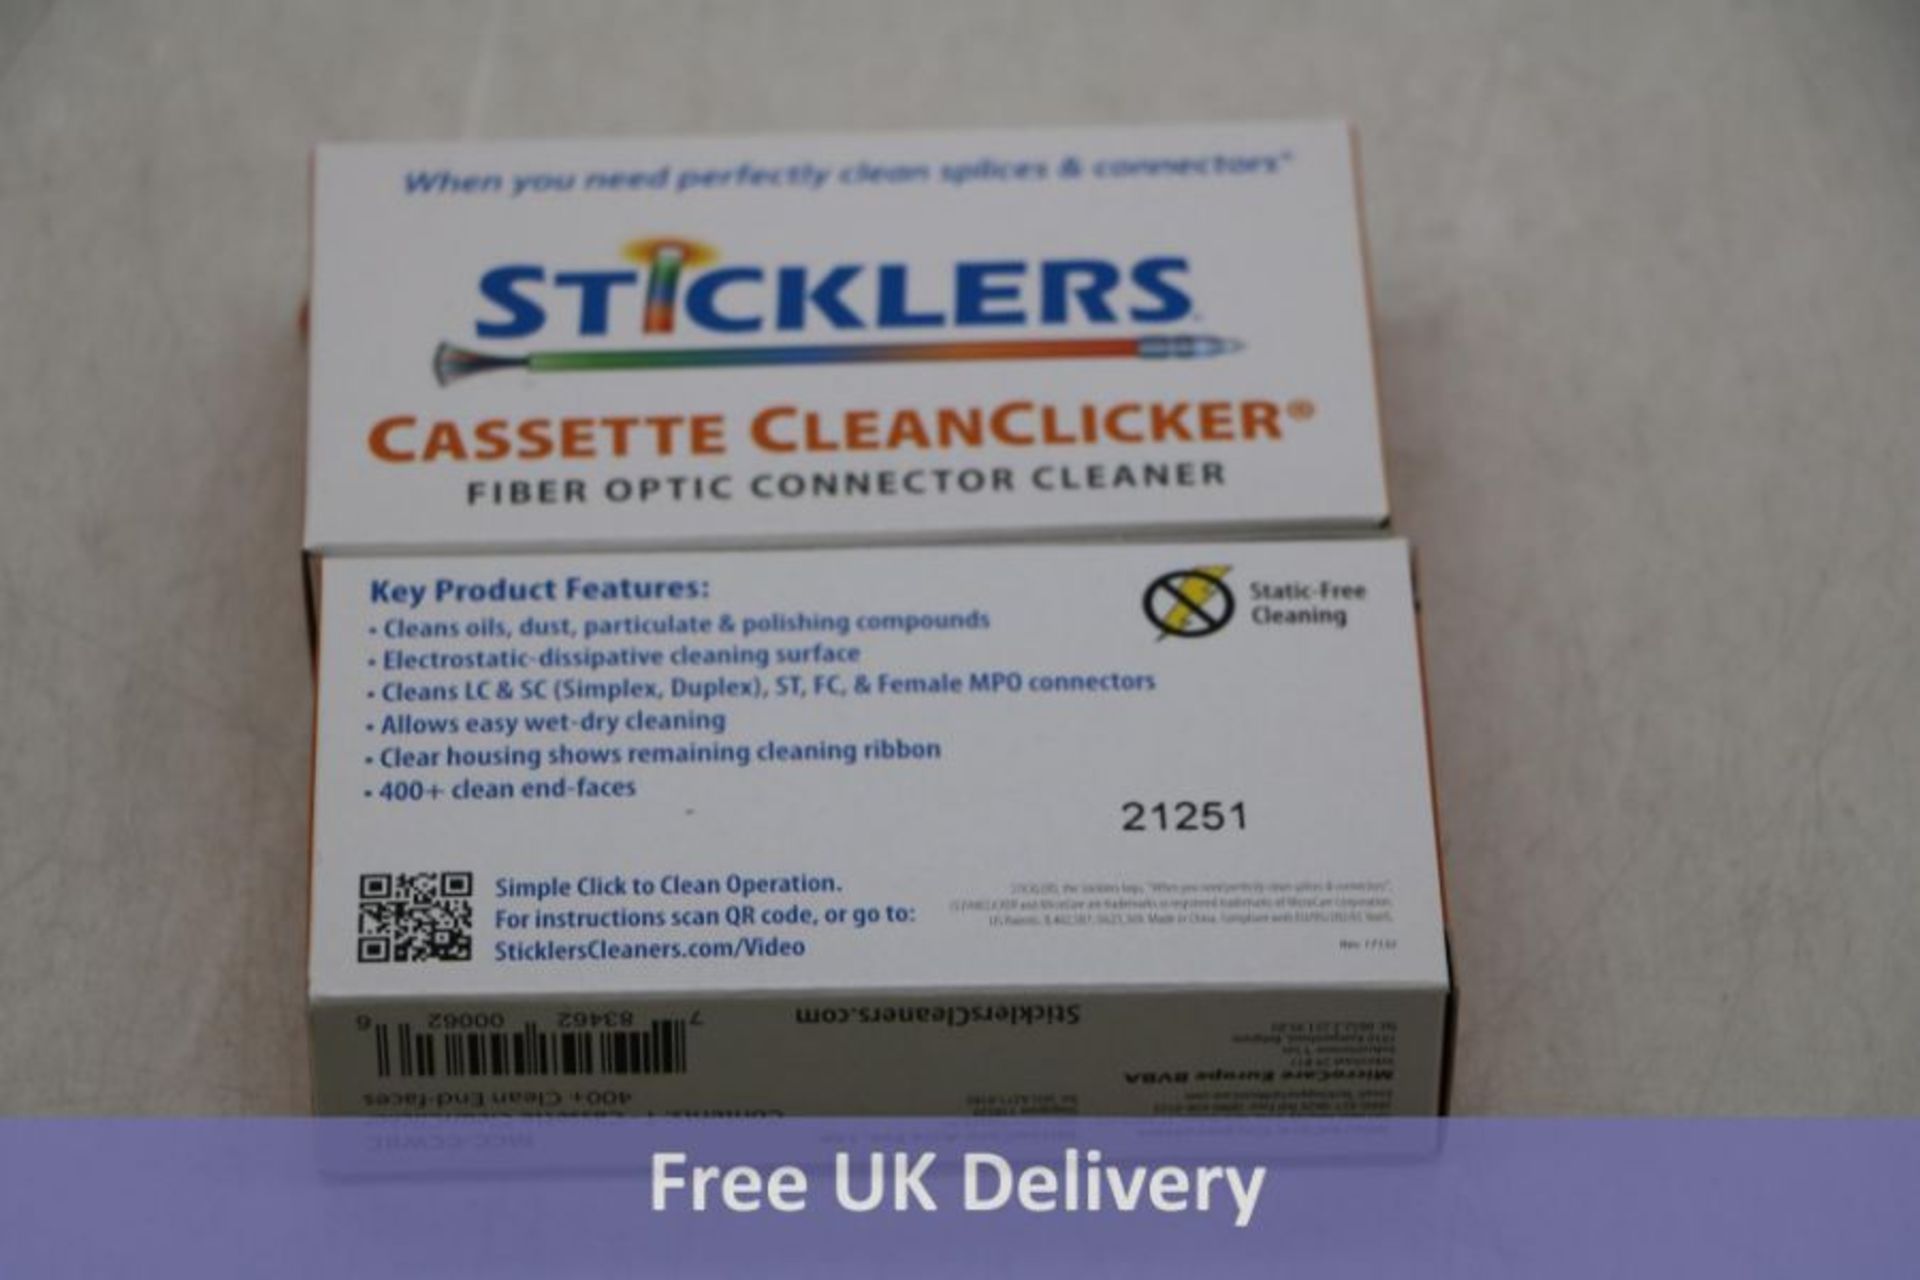 Two Sticklers Cassette Clean Clicker Fiber, Connector Cleaner